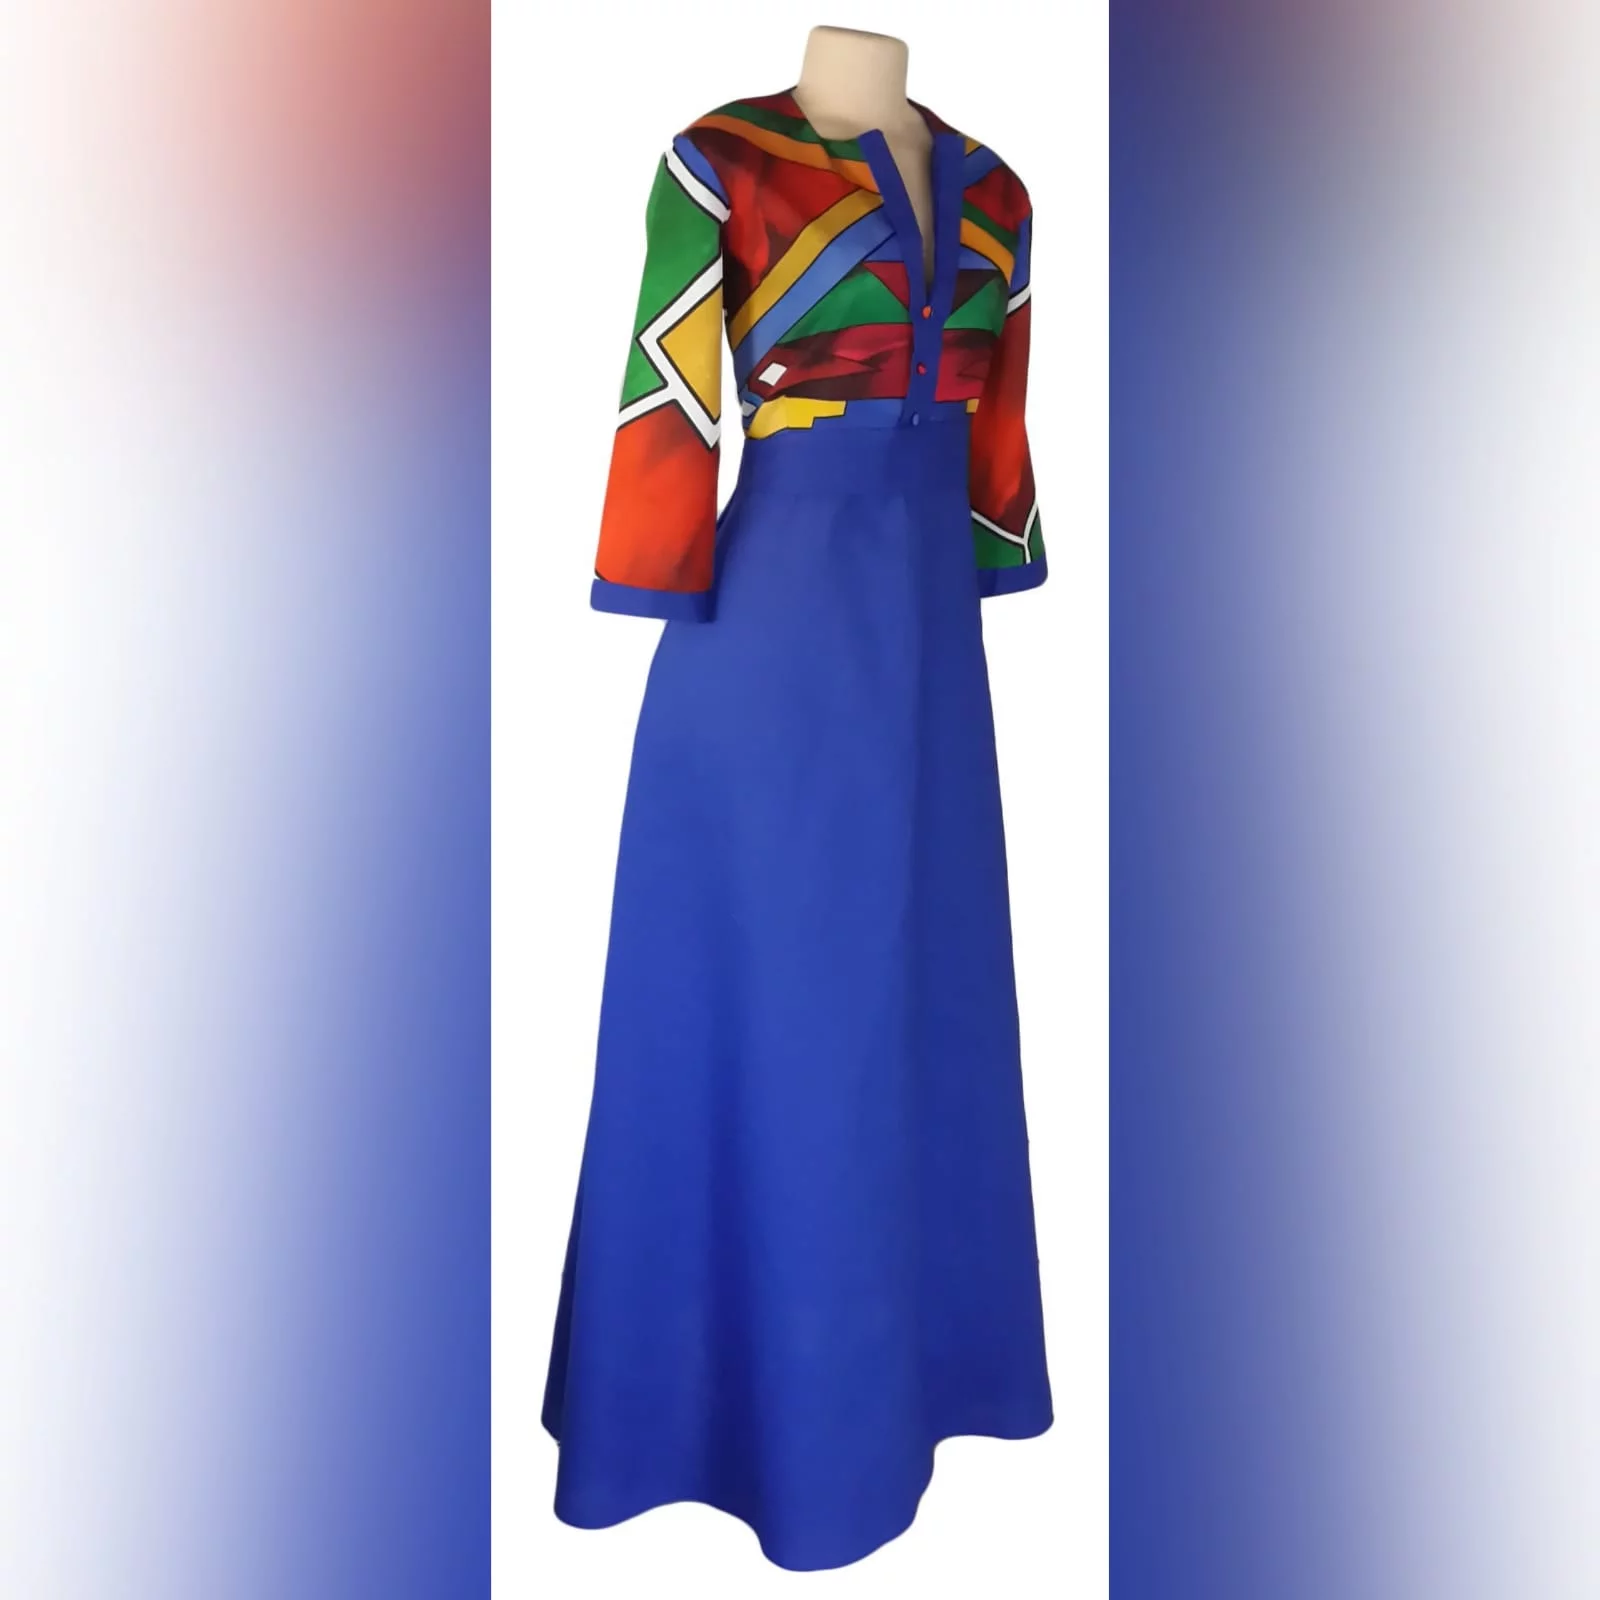 Royal blue ndebele dress and matching ndebele shirt 7 royal blue and ndebele empire fit dress. Bodice with ndebele print and 3/4 sleeves and an under bust belt. Mens matching ndebele shirt in royal blue. Traditional wedding attire.